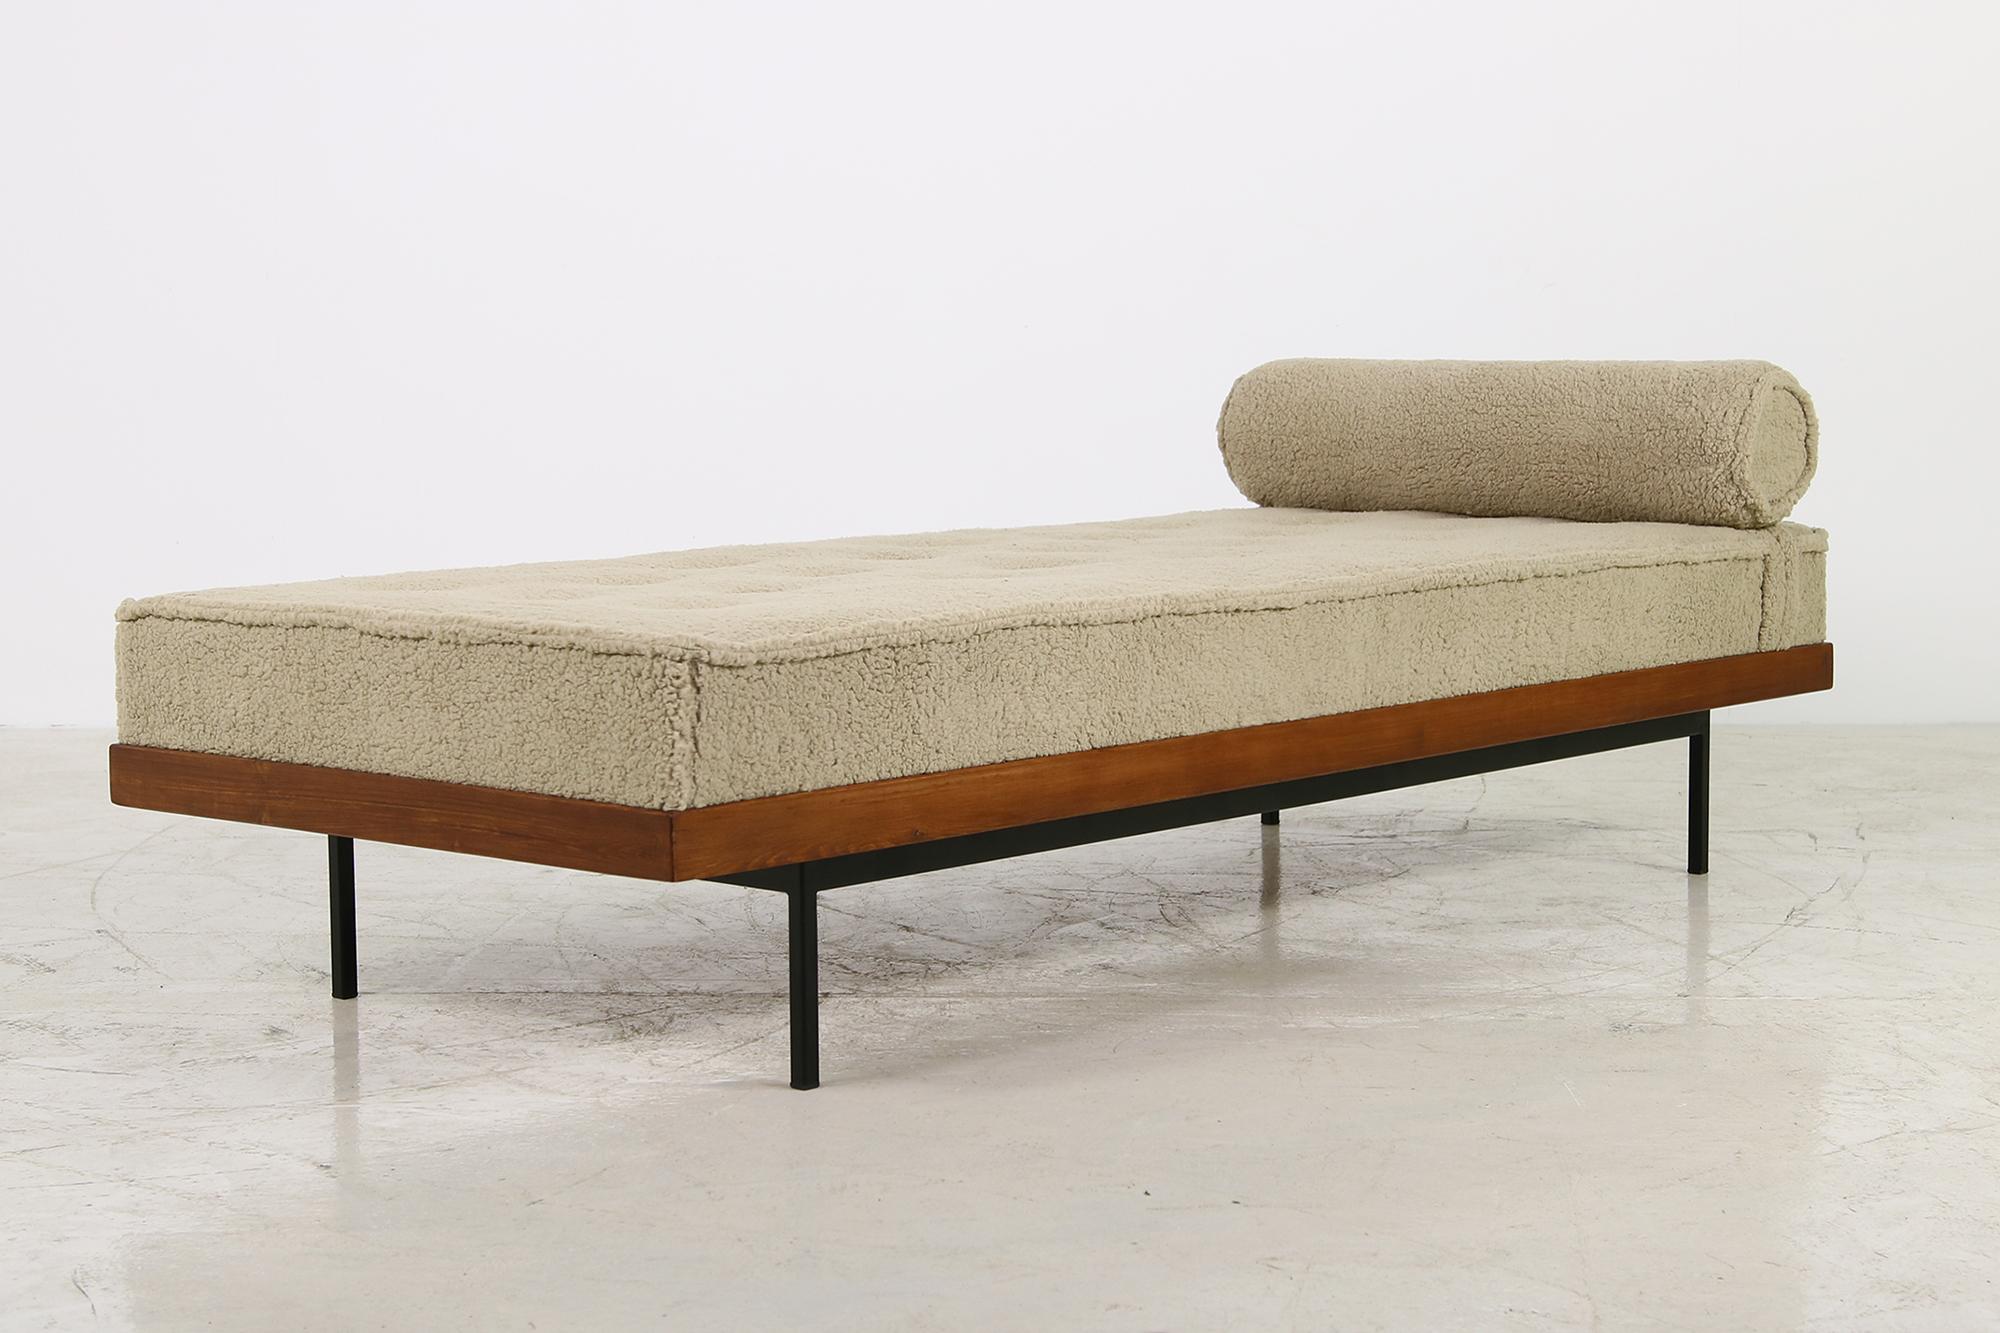 German Nathan Lindberg Daybed Mod. 31 Larch Wood, Teak, Tufted, Teddy Fur and Leather